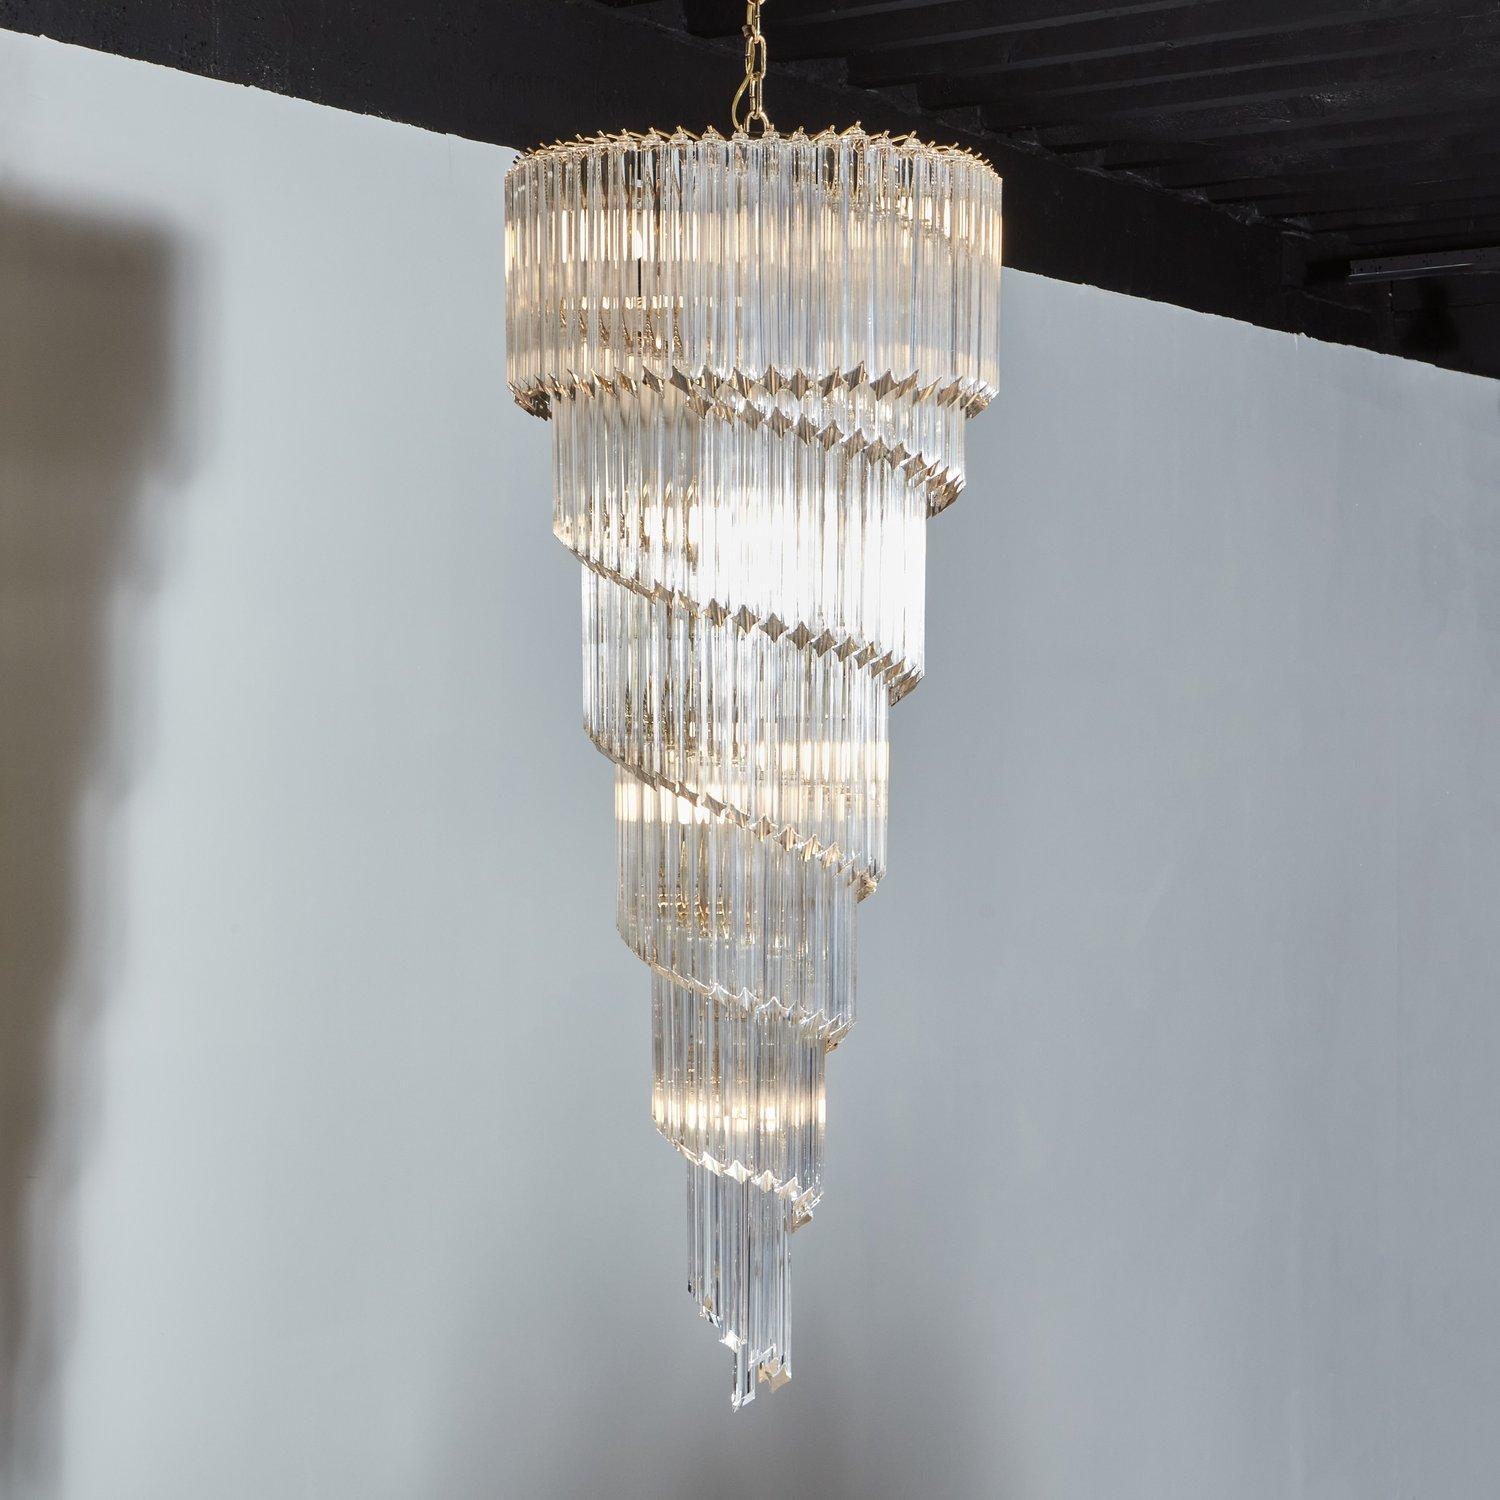 Mid-Century Modern Vintage Crystal Spiral Chandelier in the Style of Venini, Italy, 1970s